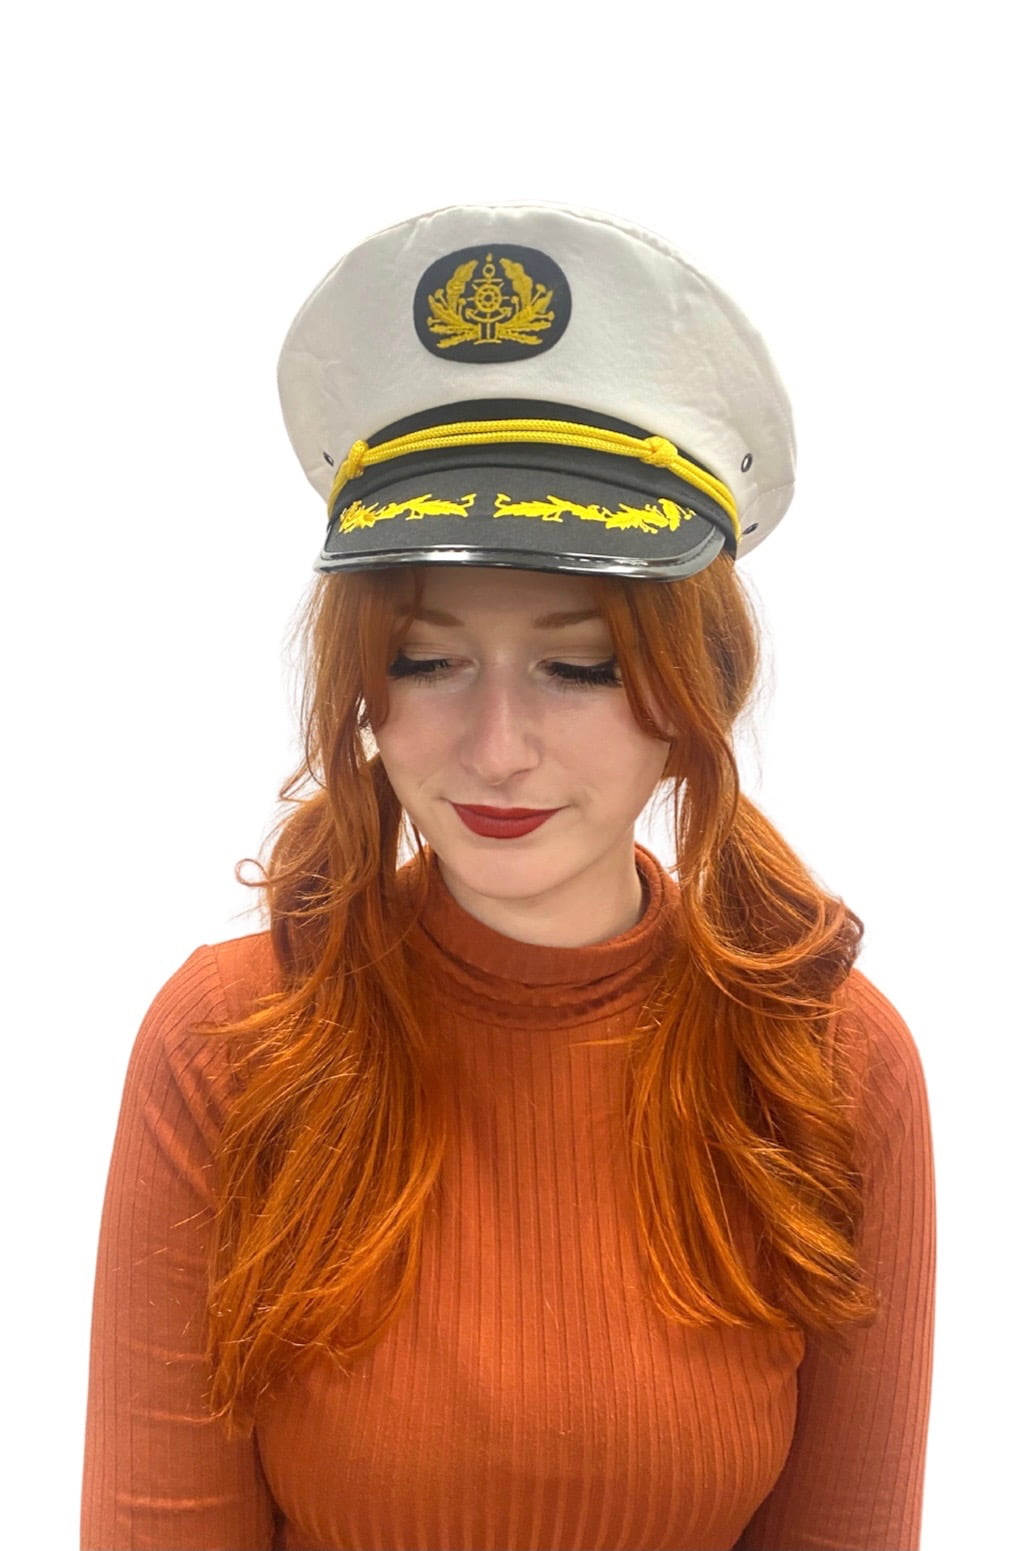 Featured image for “Captains Hat”